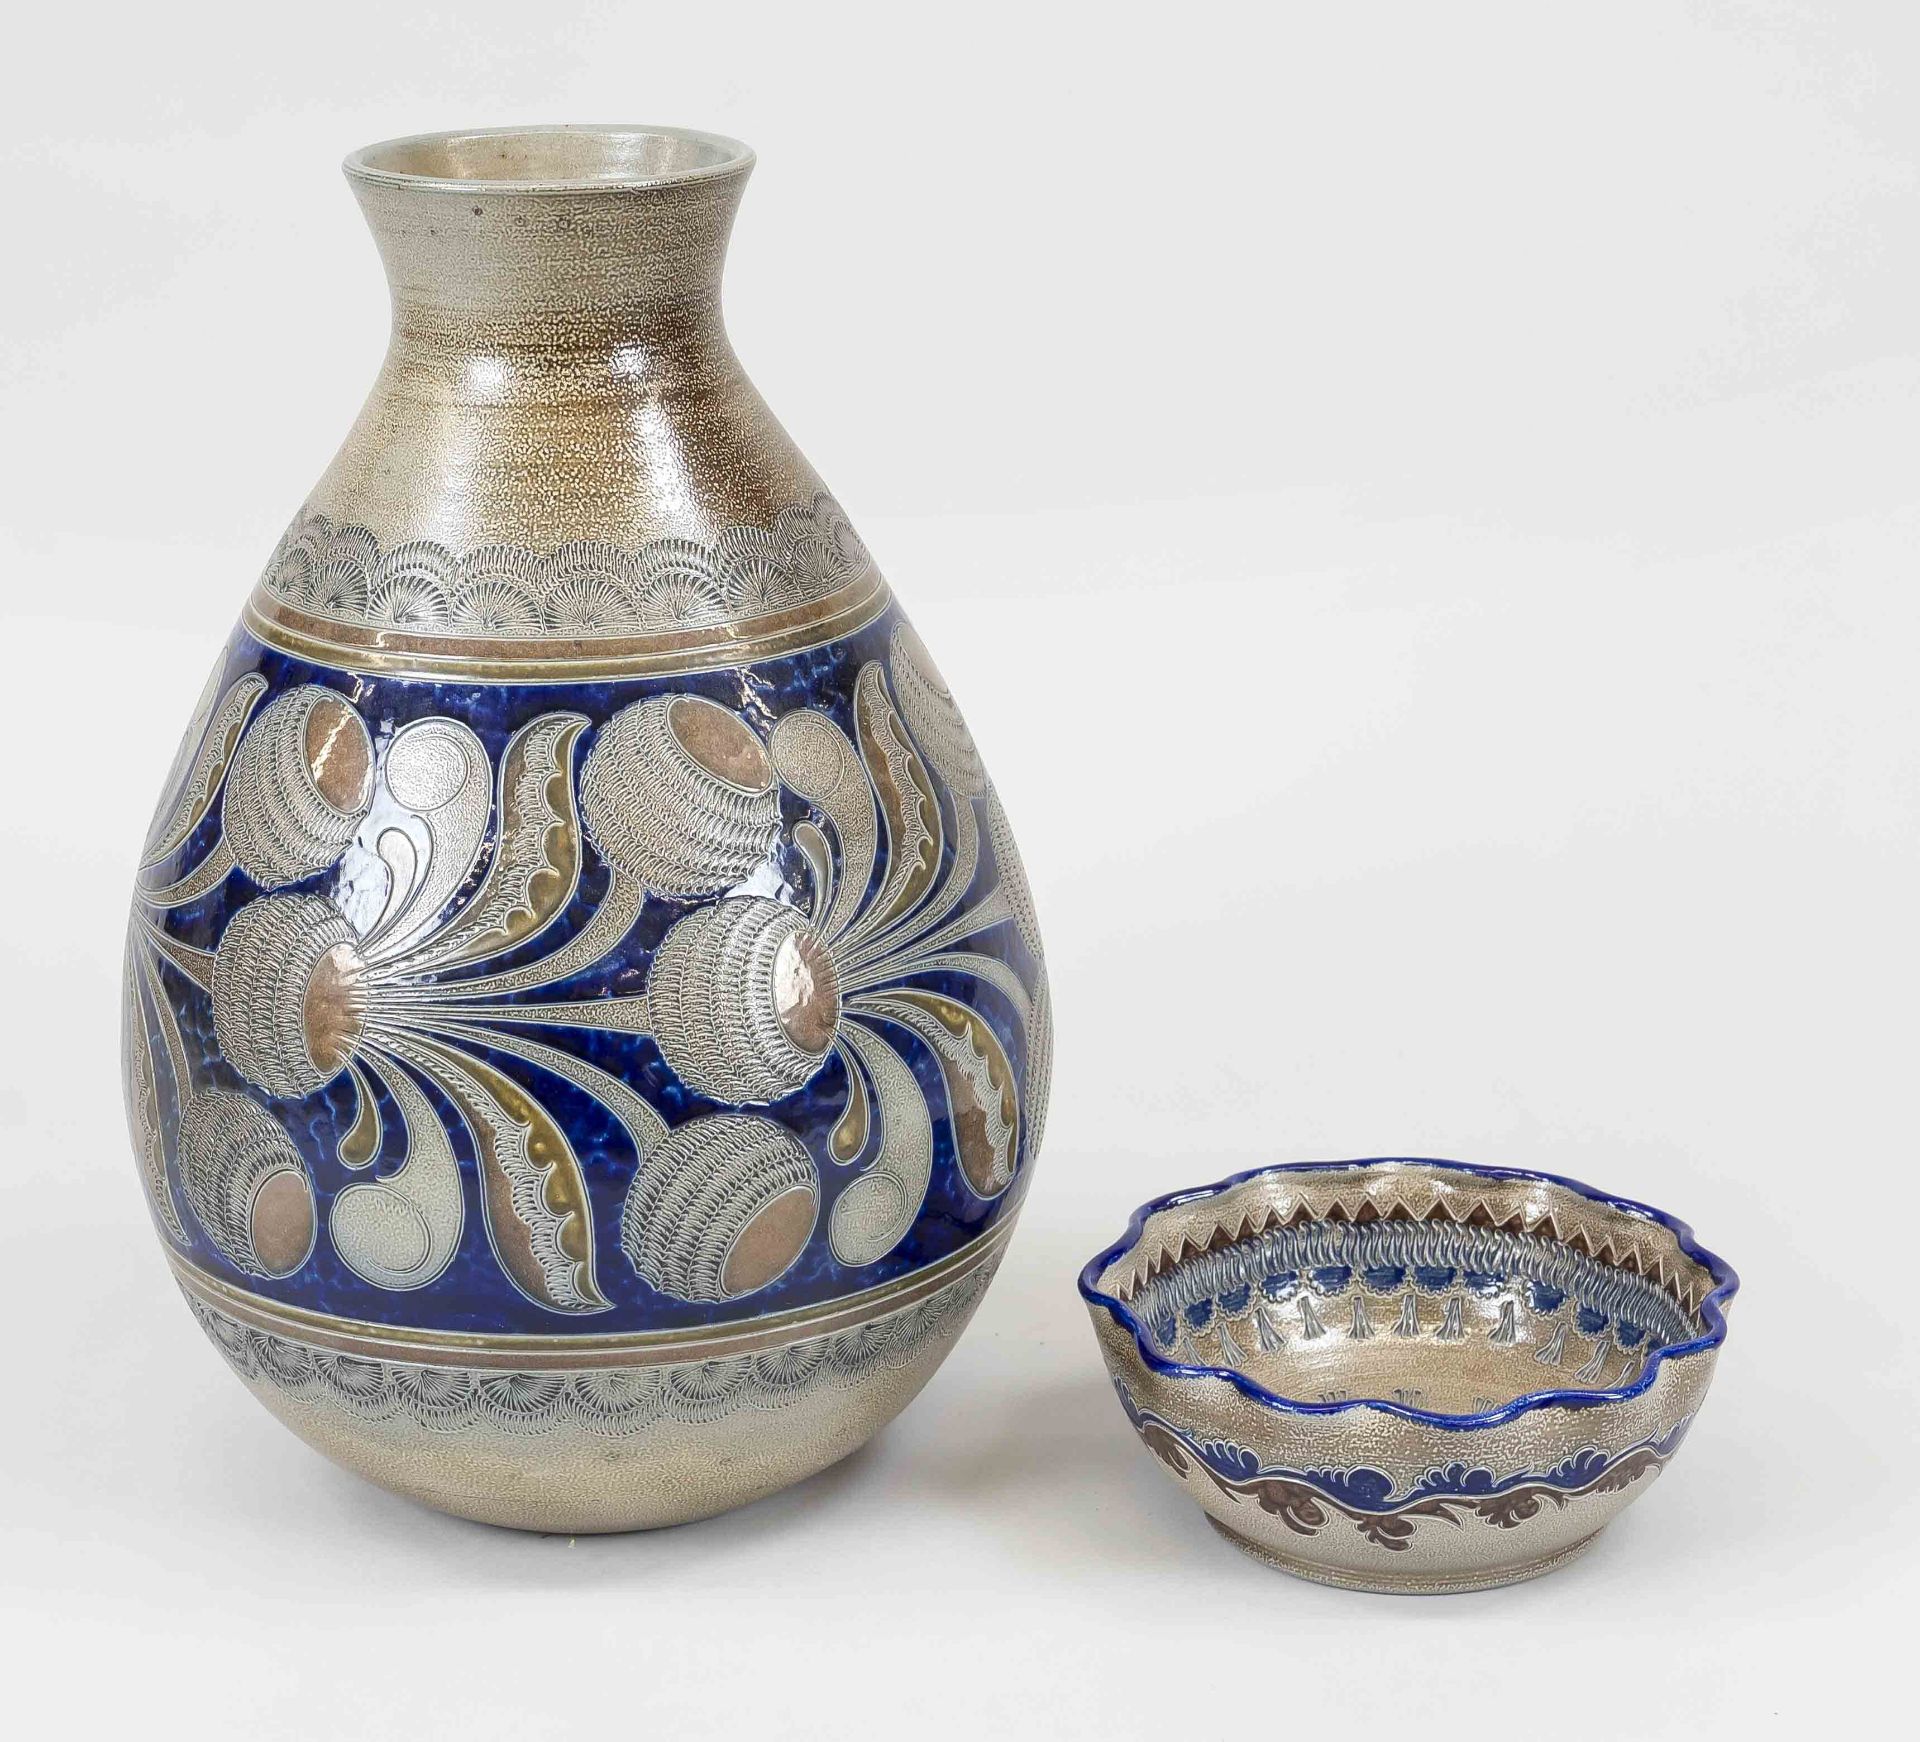 Large vase and bowl with wavy rim, Westerwald stoneware, 20th century, cut and incised decoration,